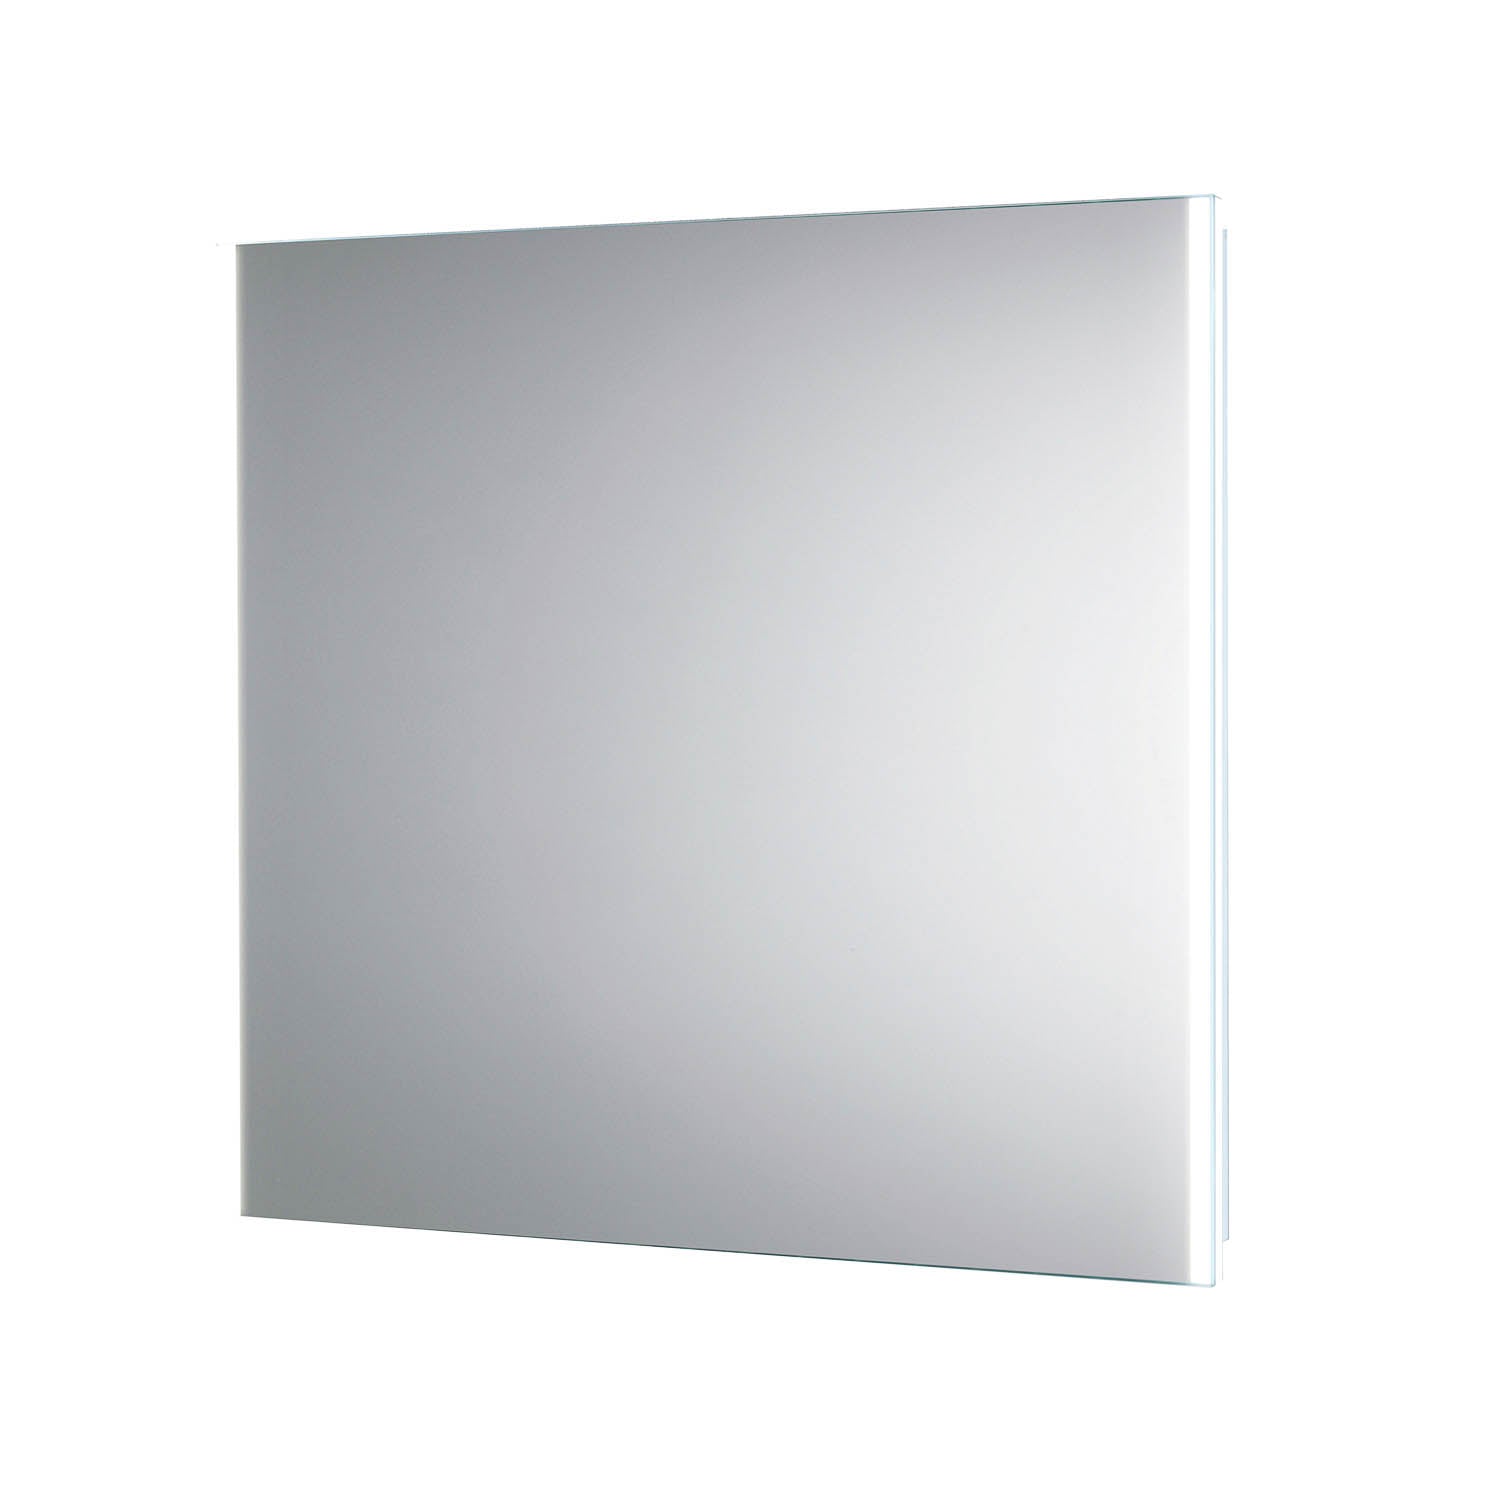 800x600mm Side Lit LED Light Mirror on a white background